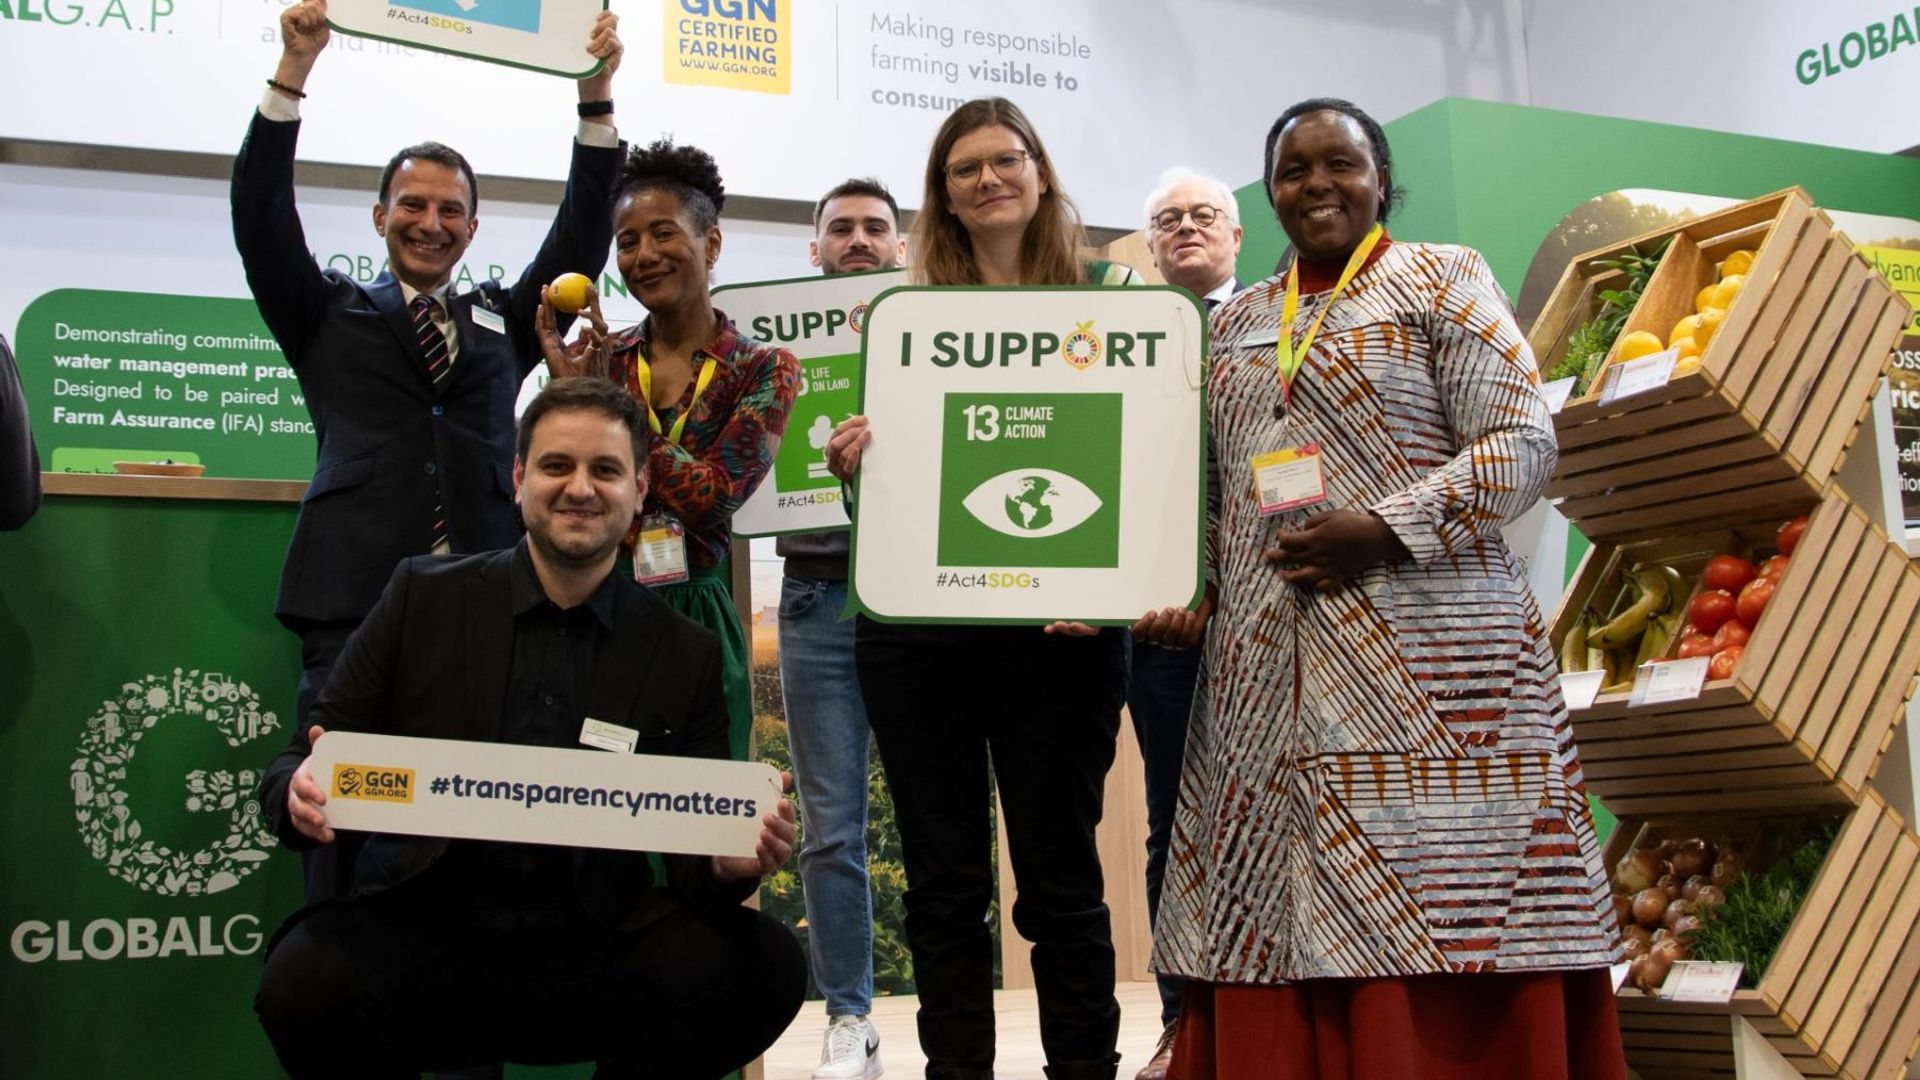 Stakeholders holding signs related to the UN Sustainable Development Goals at the GLOBALG.A.P. booth at Fruit Logistica 2024 in Berlin.